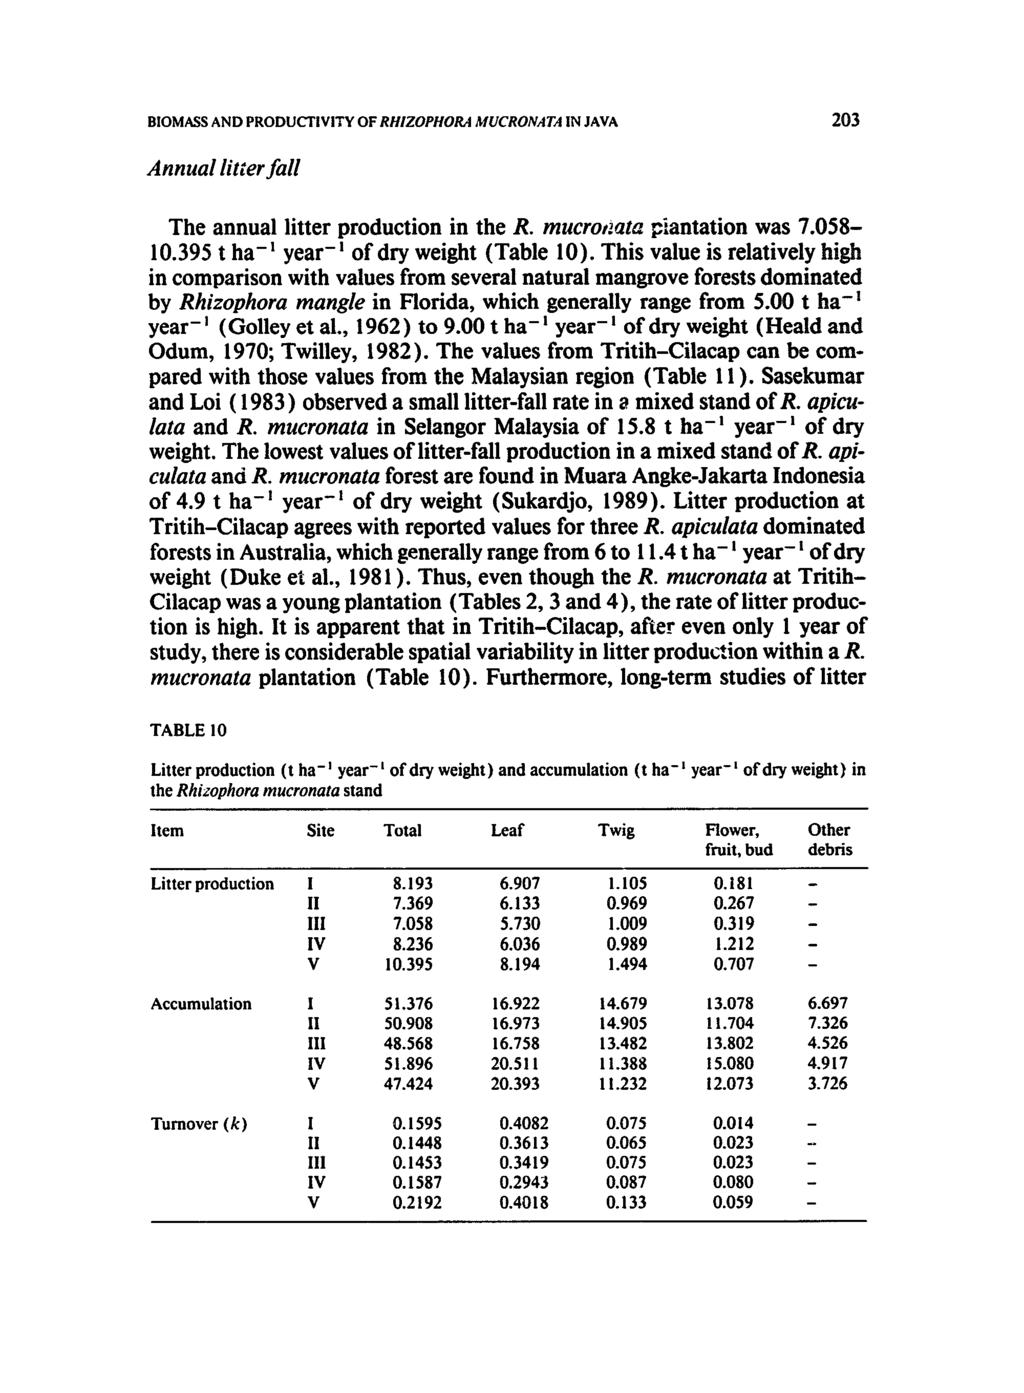 BIOMASS AND PRODUCTIVITY OF RHIZOPHORA MUCRONATA IN JAVA 203 Annual litter fall The annual litter production in the R. mucrot~.ata plantation was 7.058-10.395 t ha -m year -m of dry weight (Table 10).